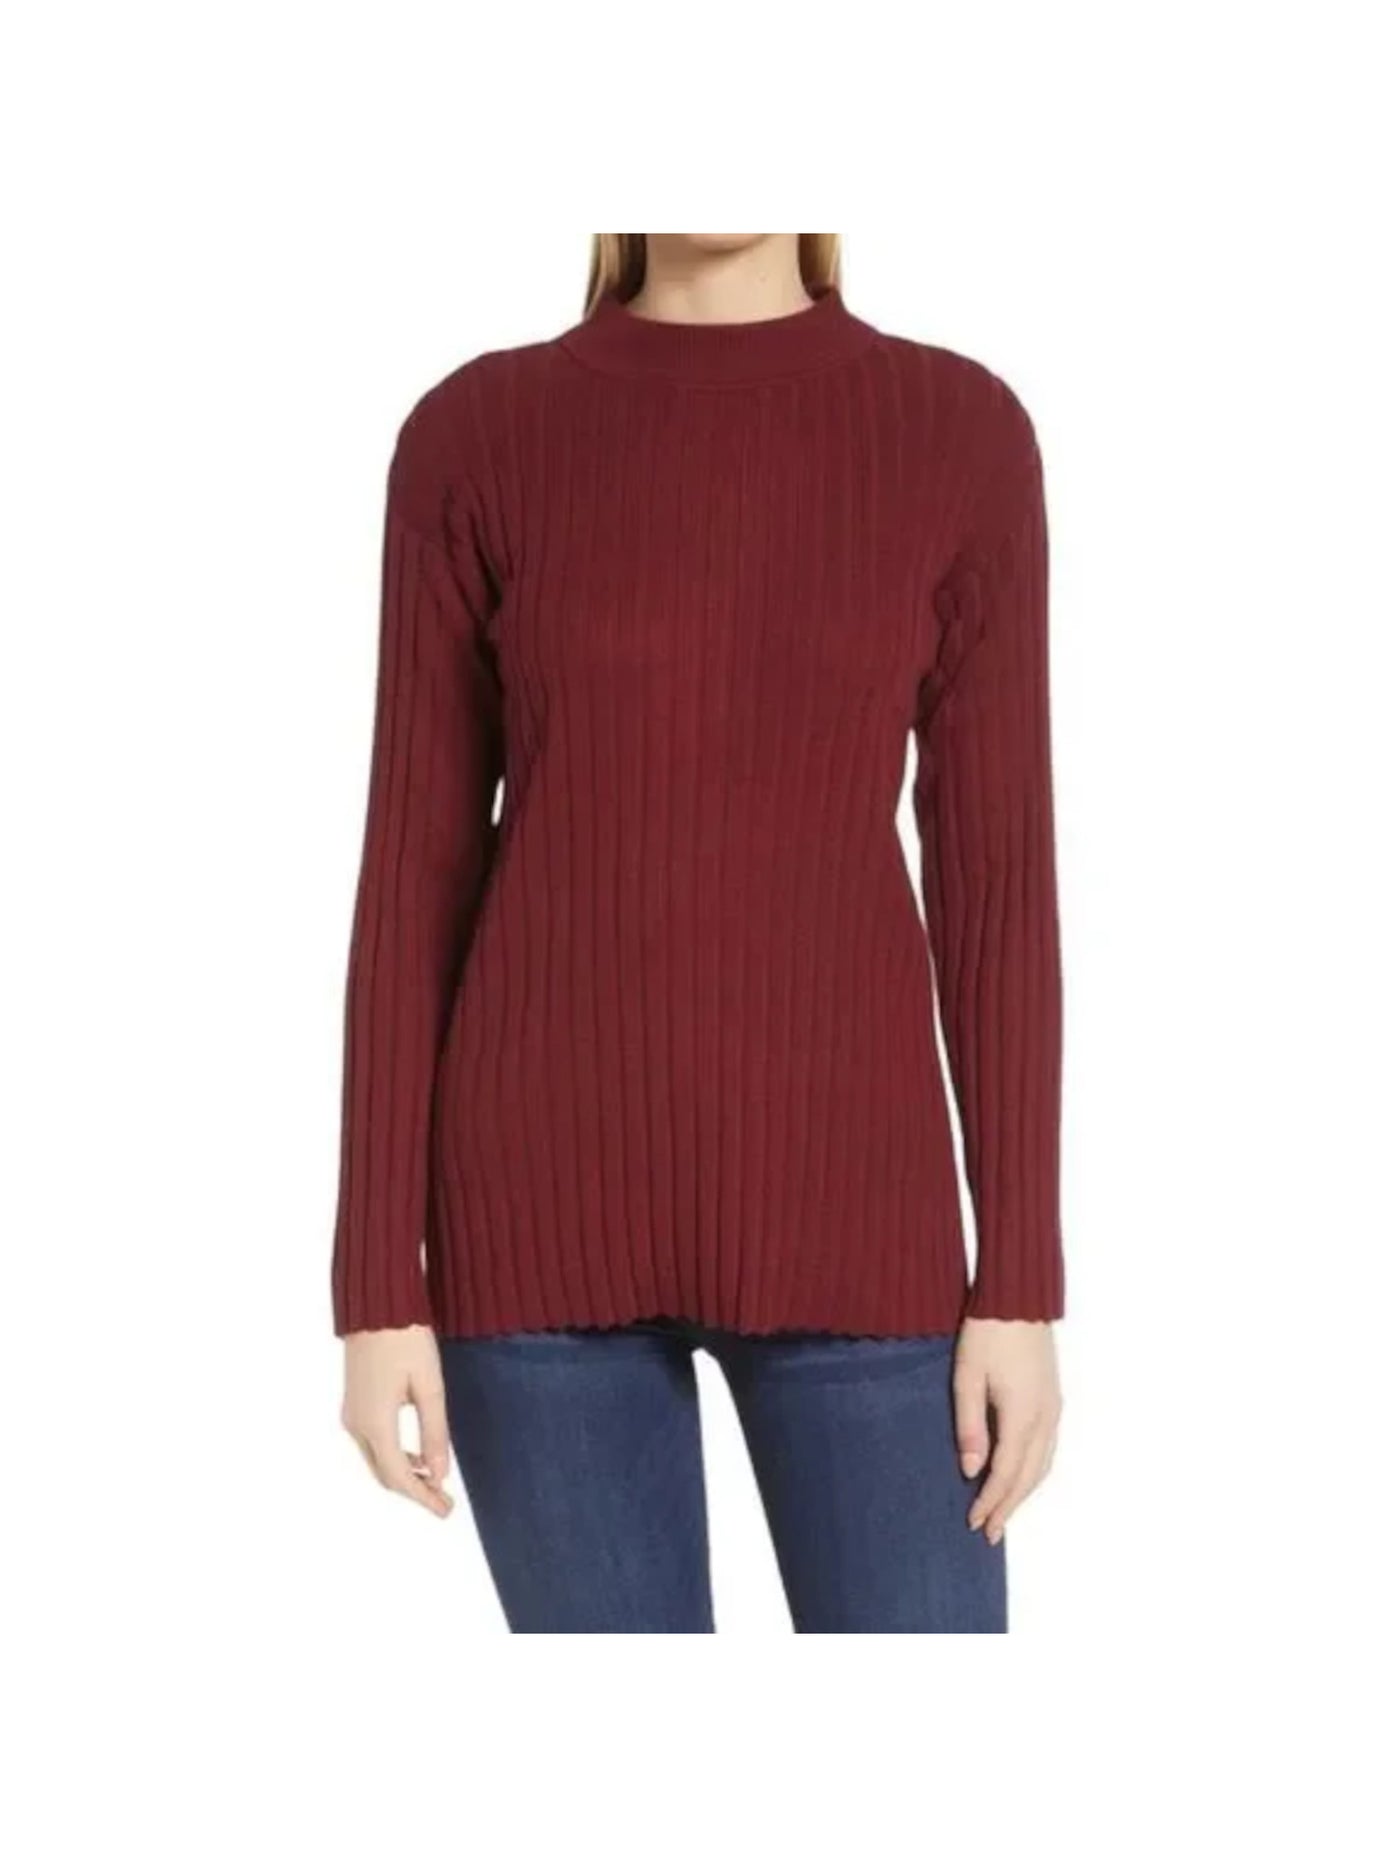 VINCE CAMUTO Womens Maroon Ribbed Long Sleeve Mock Neck Sweater XXL